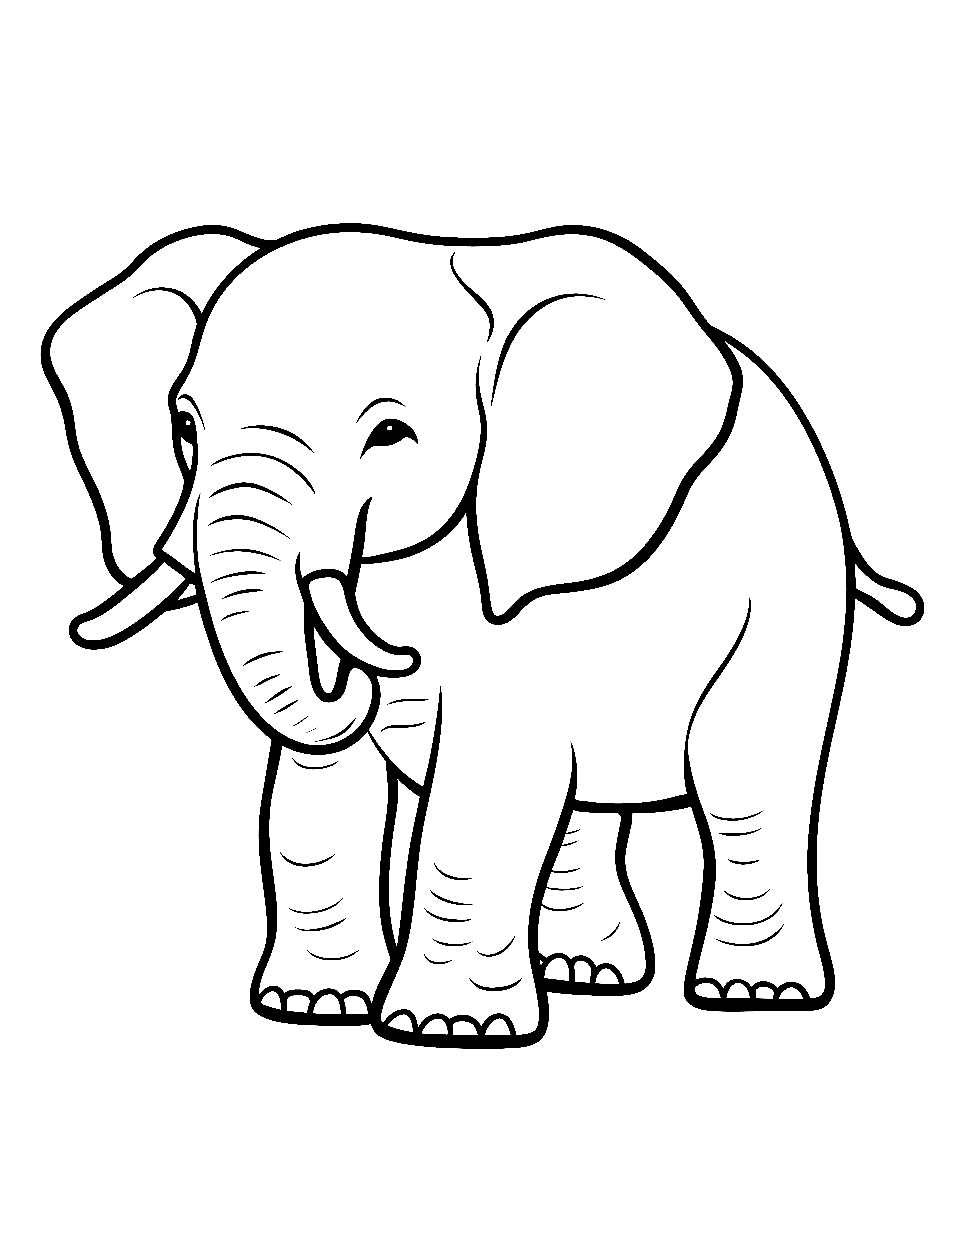 Child's Elephant Drawing Coloring Page - An elephant as envisioned and drawn by a child.